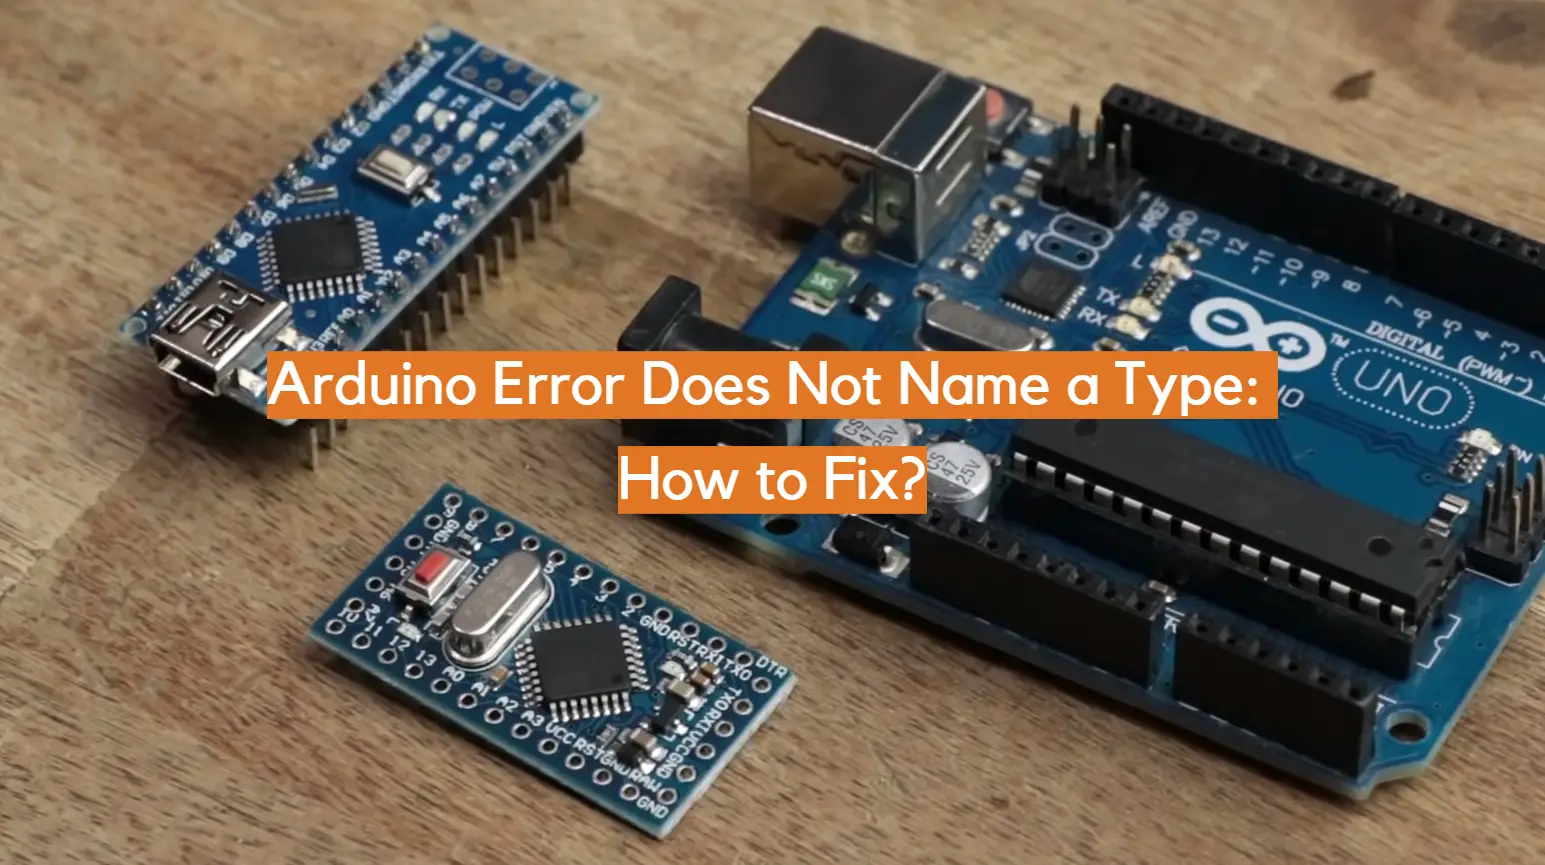 Arduino Error Does Not Name a Type: How to Fix?